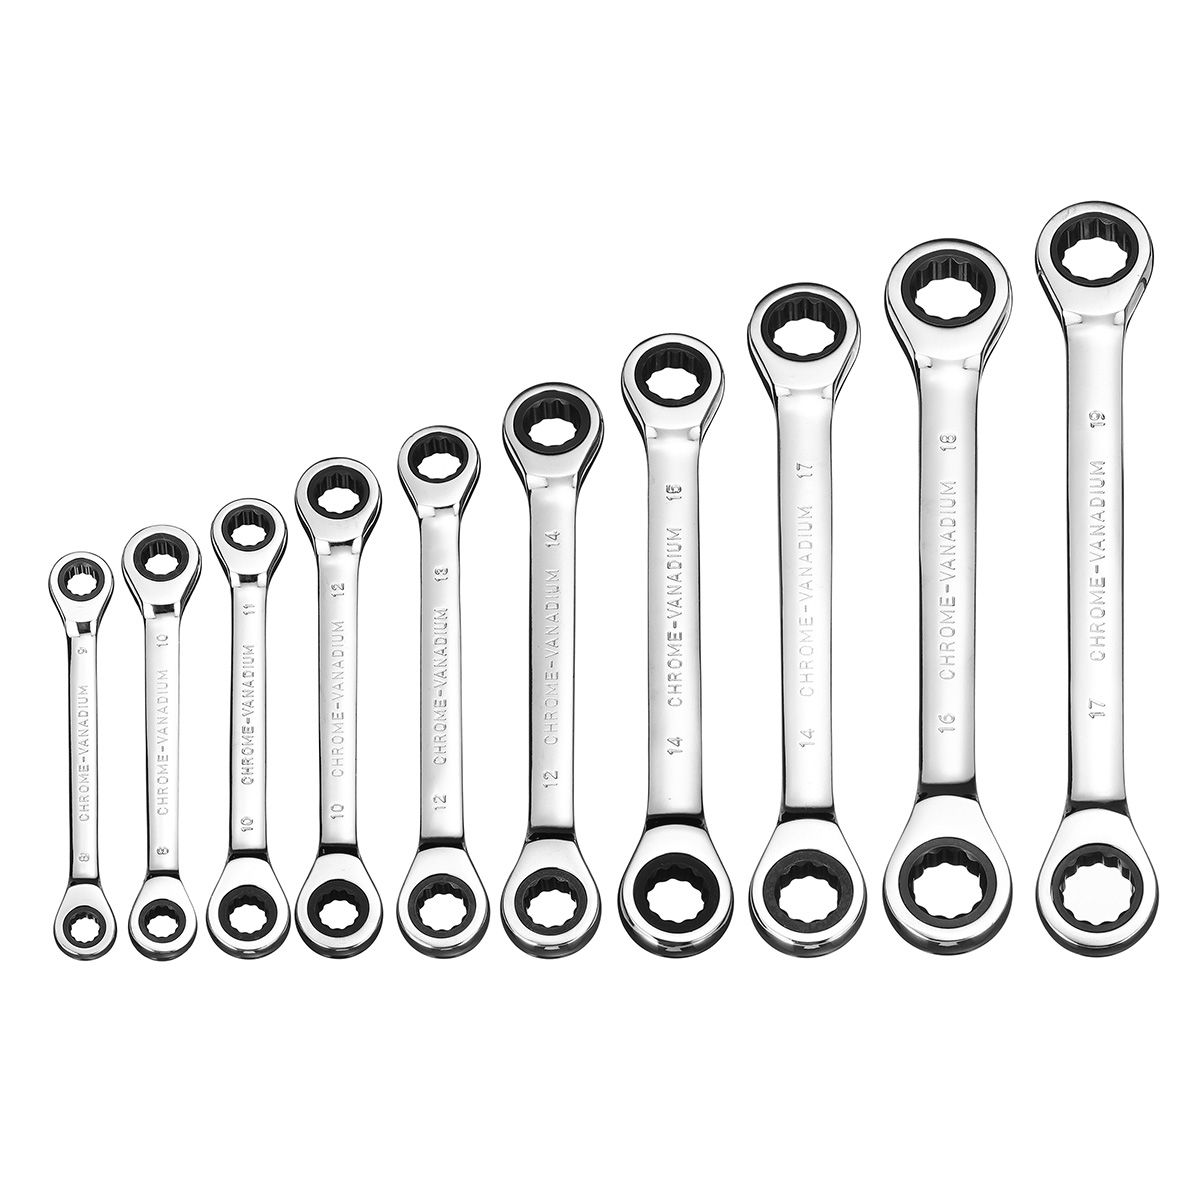 8-19mm-Steel-Metric-Fixed-Head-Ratchet-Spanner-Gear-Wrench-Double-End-Ring-Tool-1528692